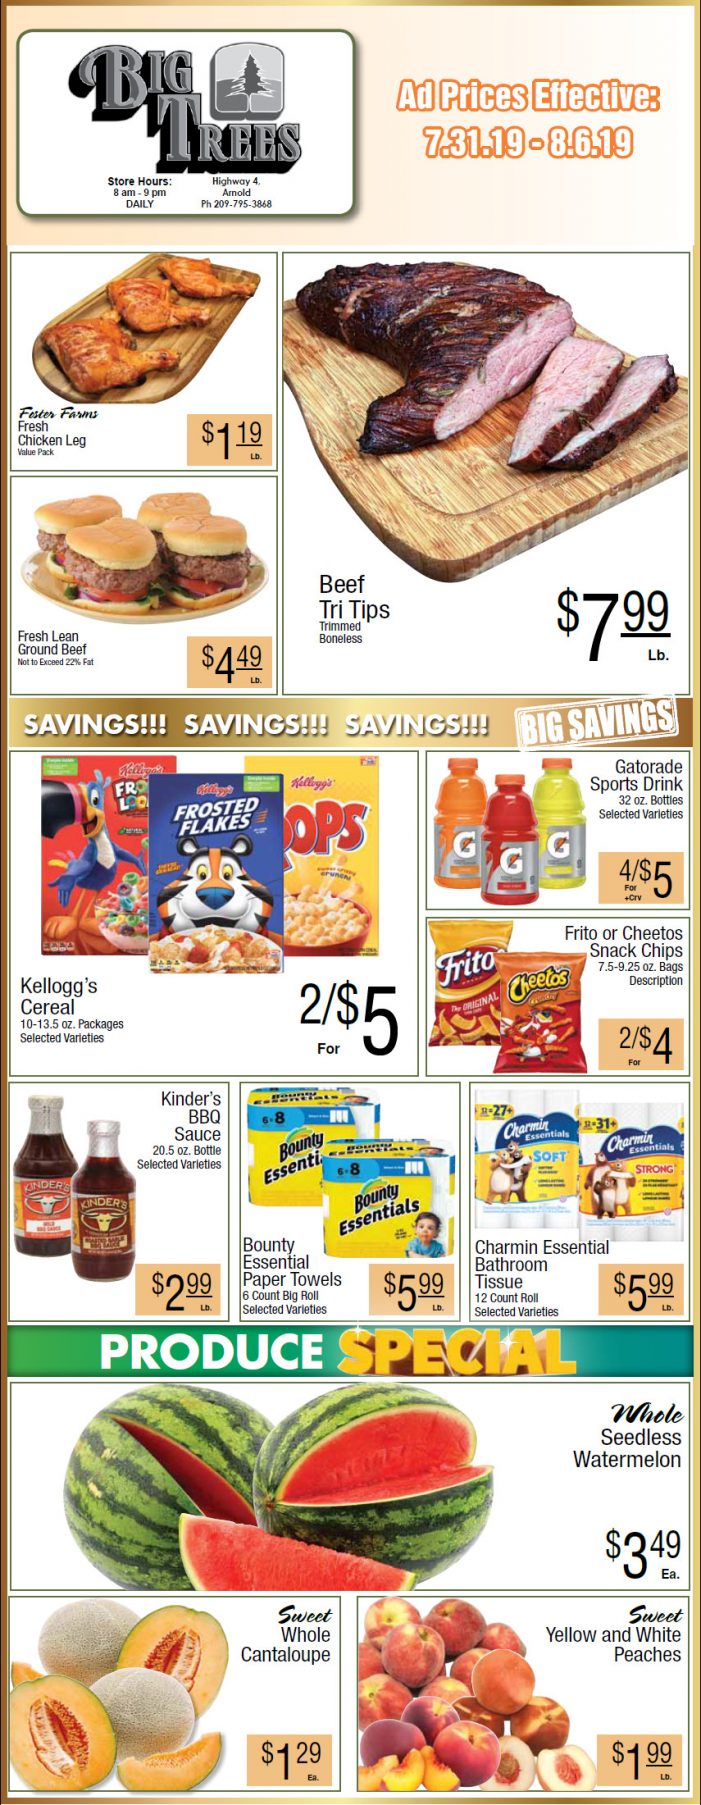 Big Trees Market Weekly Ad & Grocery Specials Through August 6th